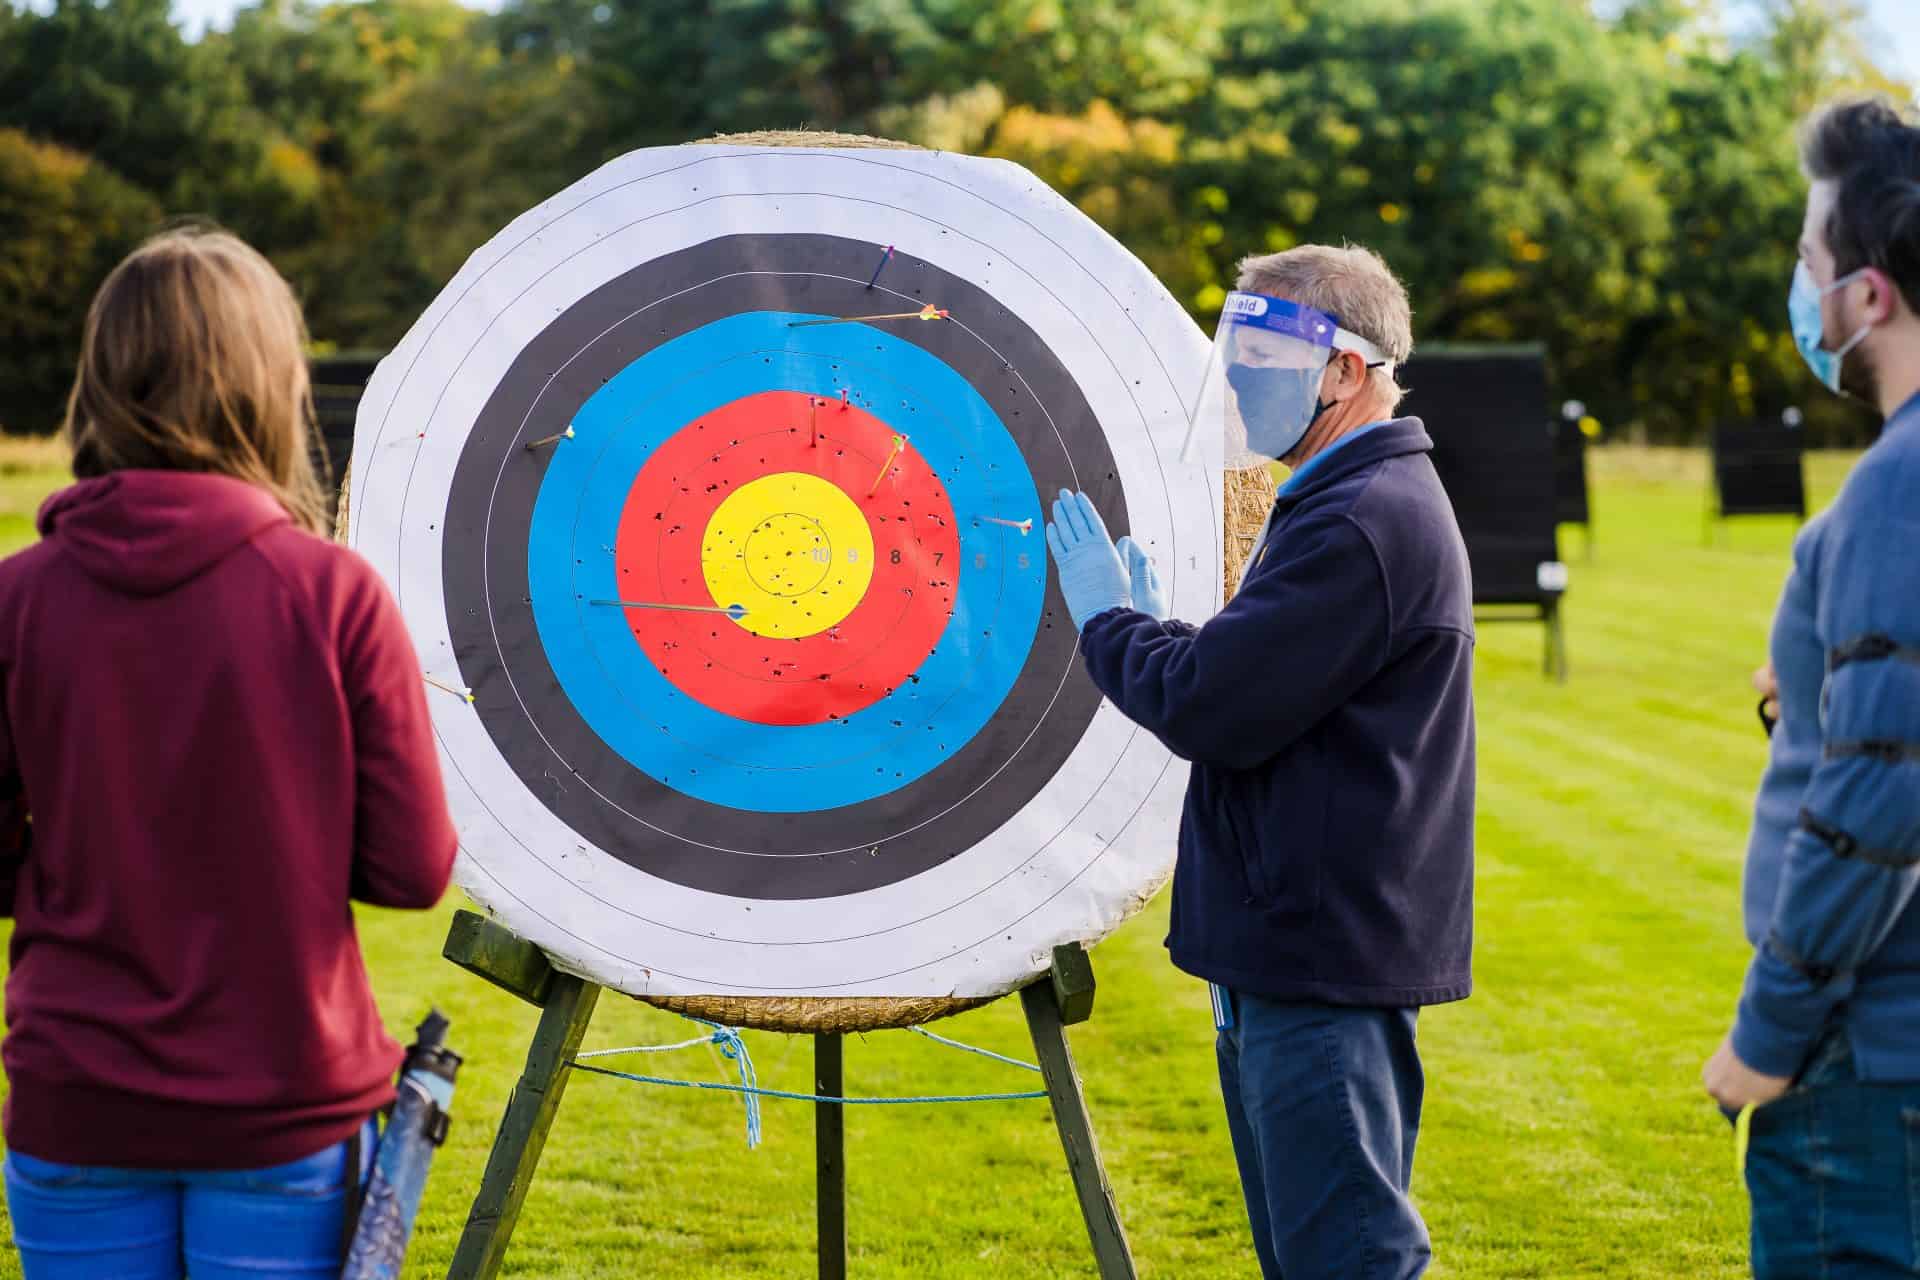 Beginners' archery course under Covid restrictions